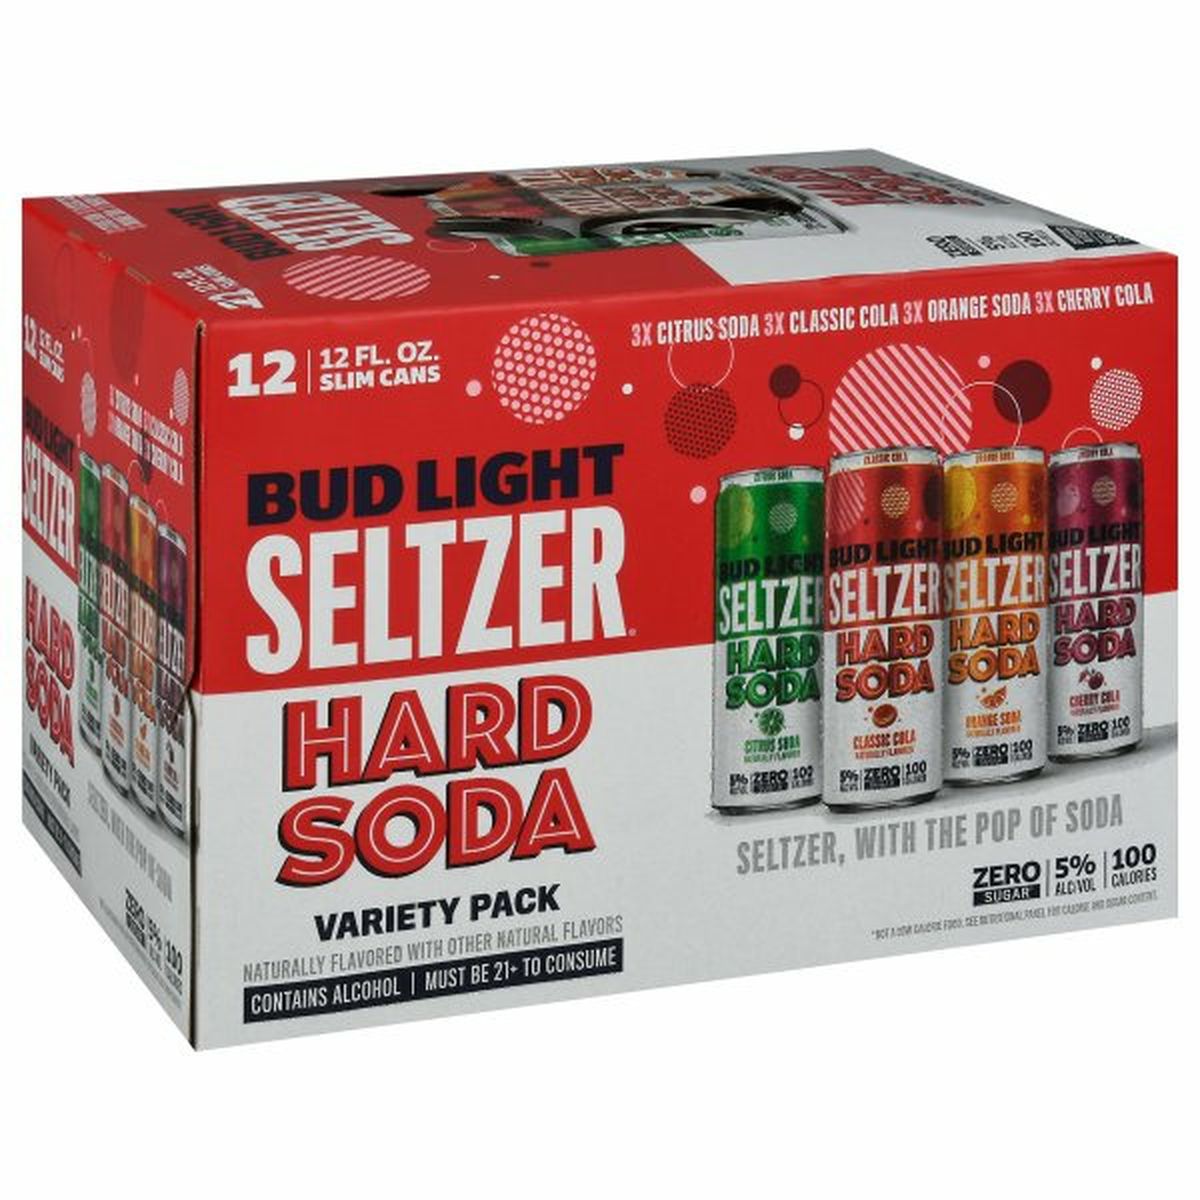 Calories in Bud Light Seltzer Hard Soda Variety Pack 12/12oz cans